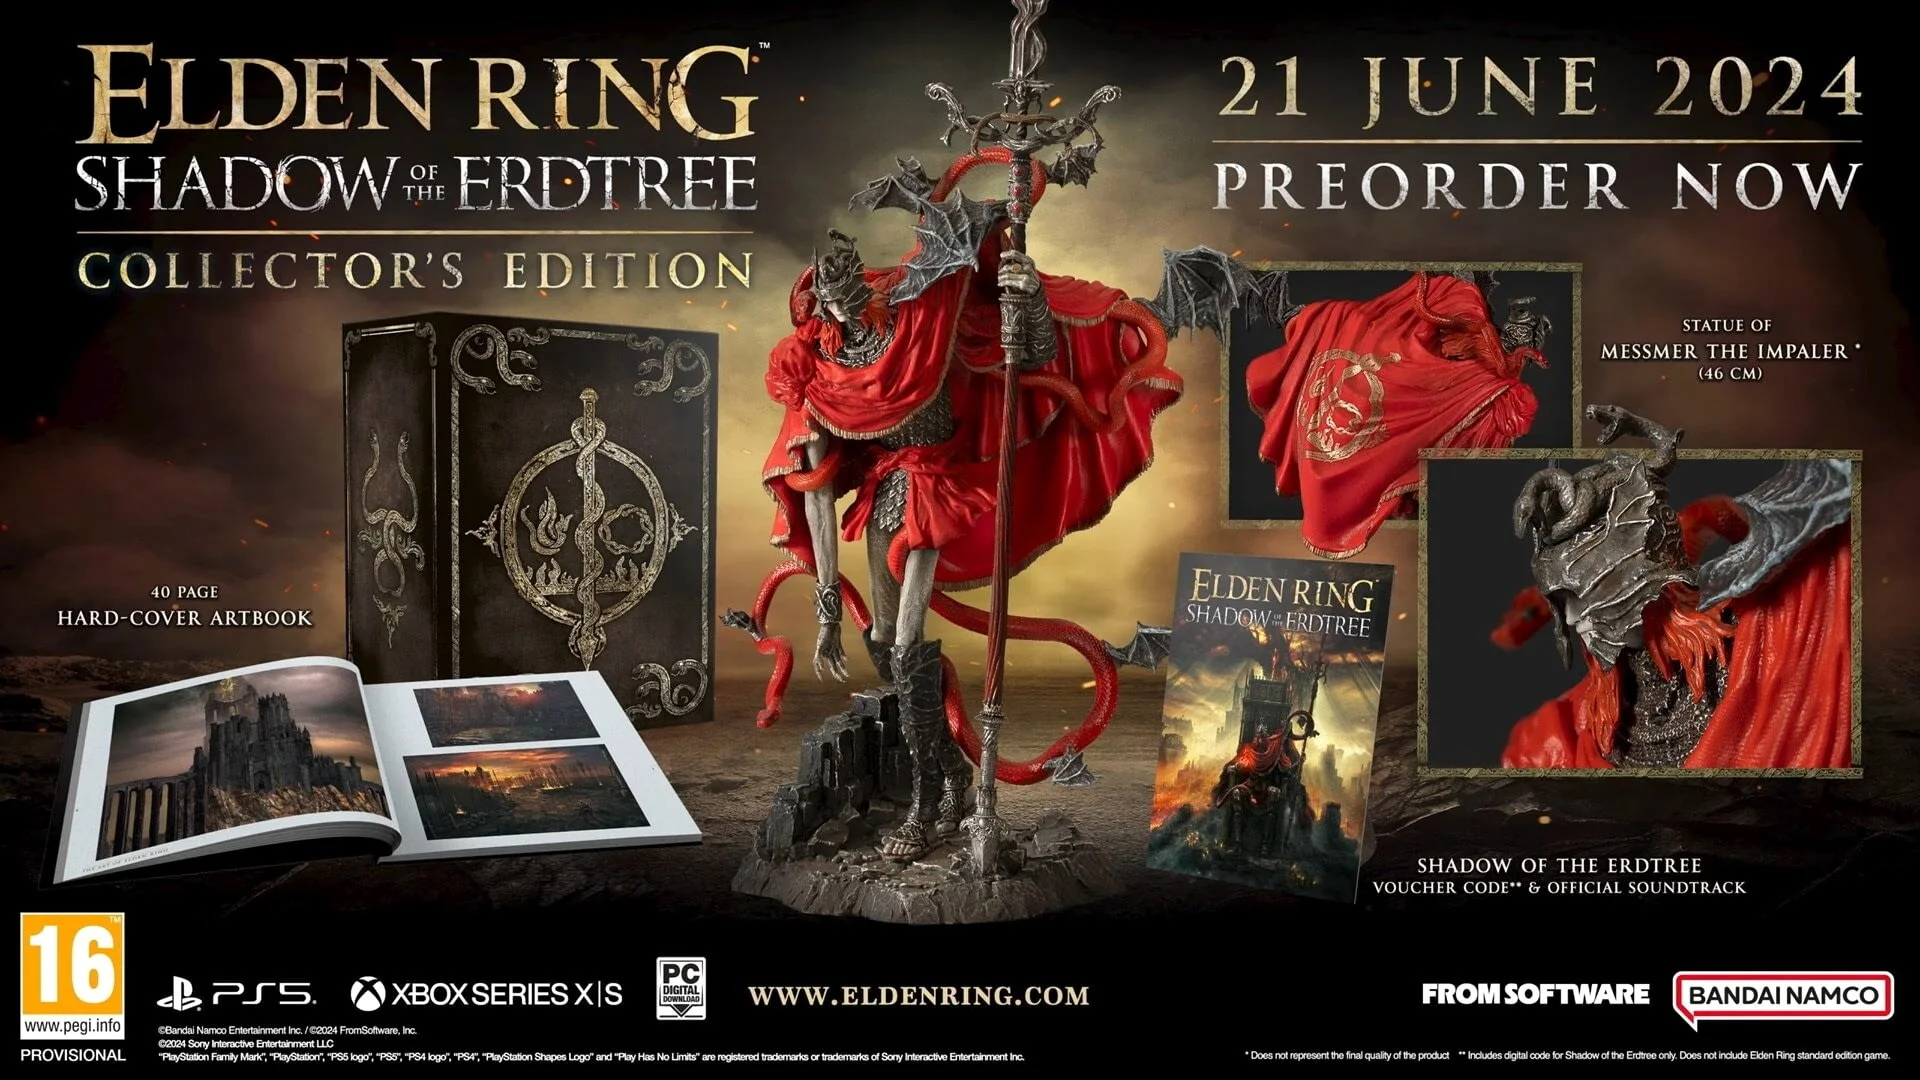 Announcement: DLC Elden Ring: Shadow of the Erdtree will be released this year